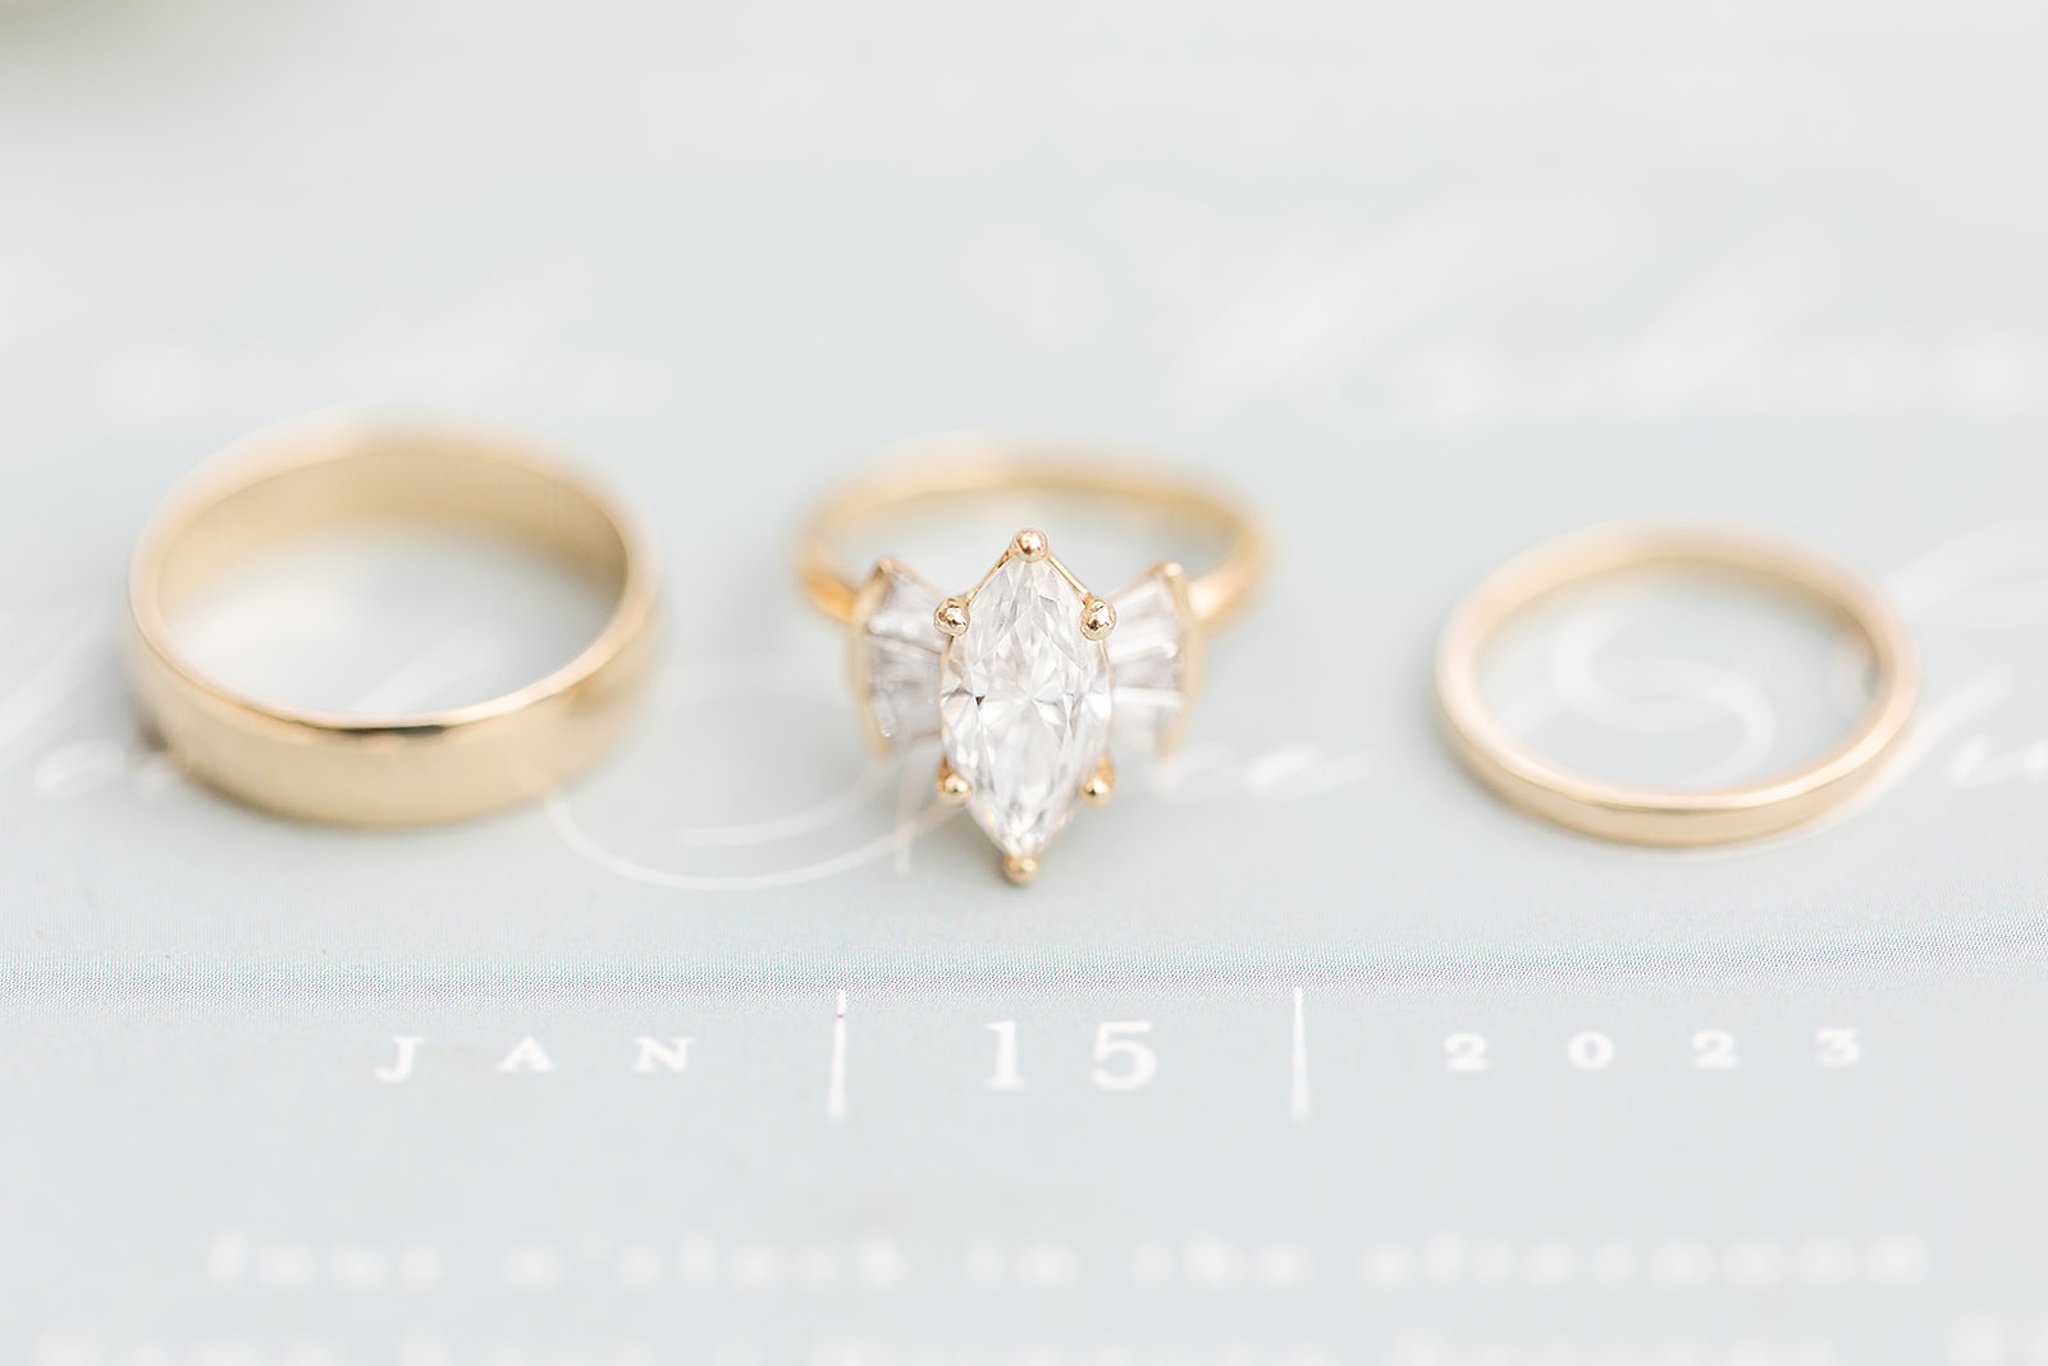 A budget-friendly gold wedding ring with a marquise cut diamond.